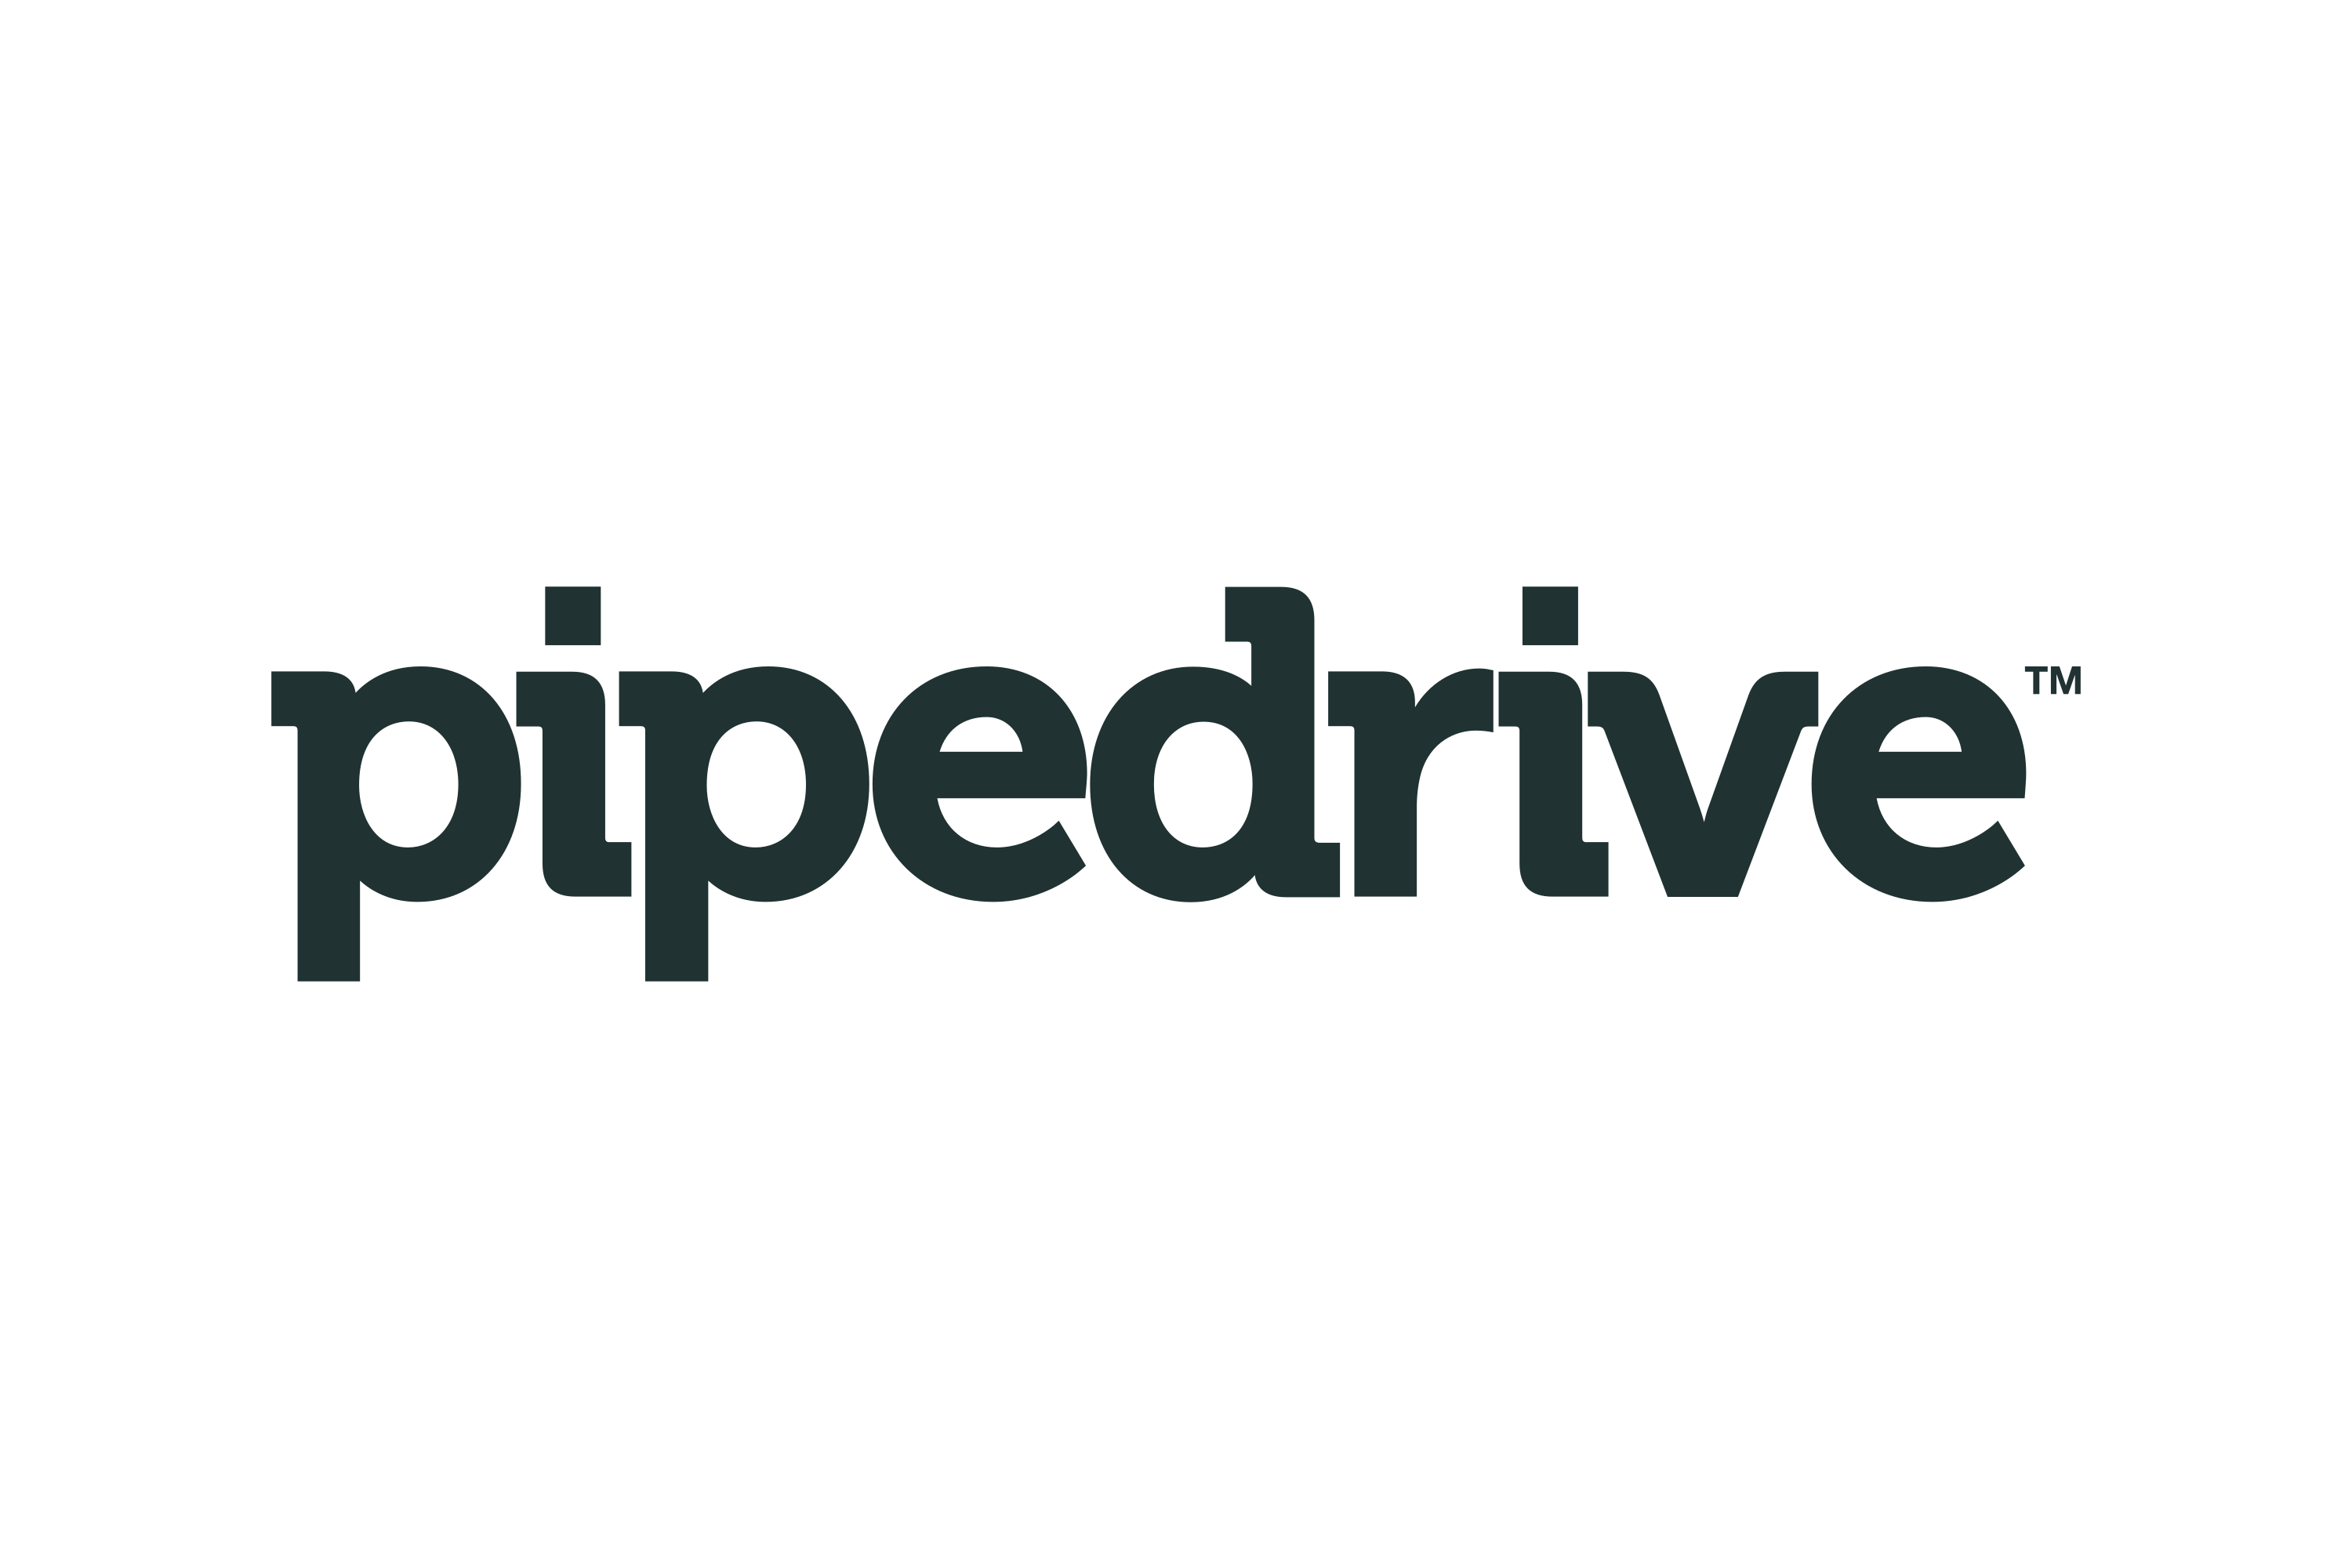 Download Pipedrive Logo in SVG Vector or PNG File Format - Logo.wine